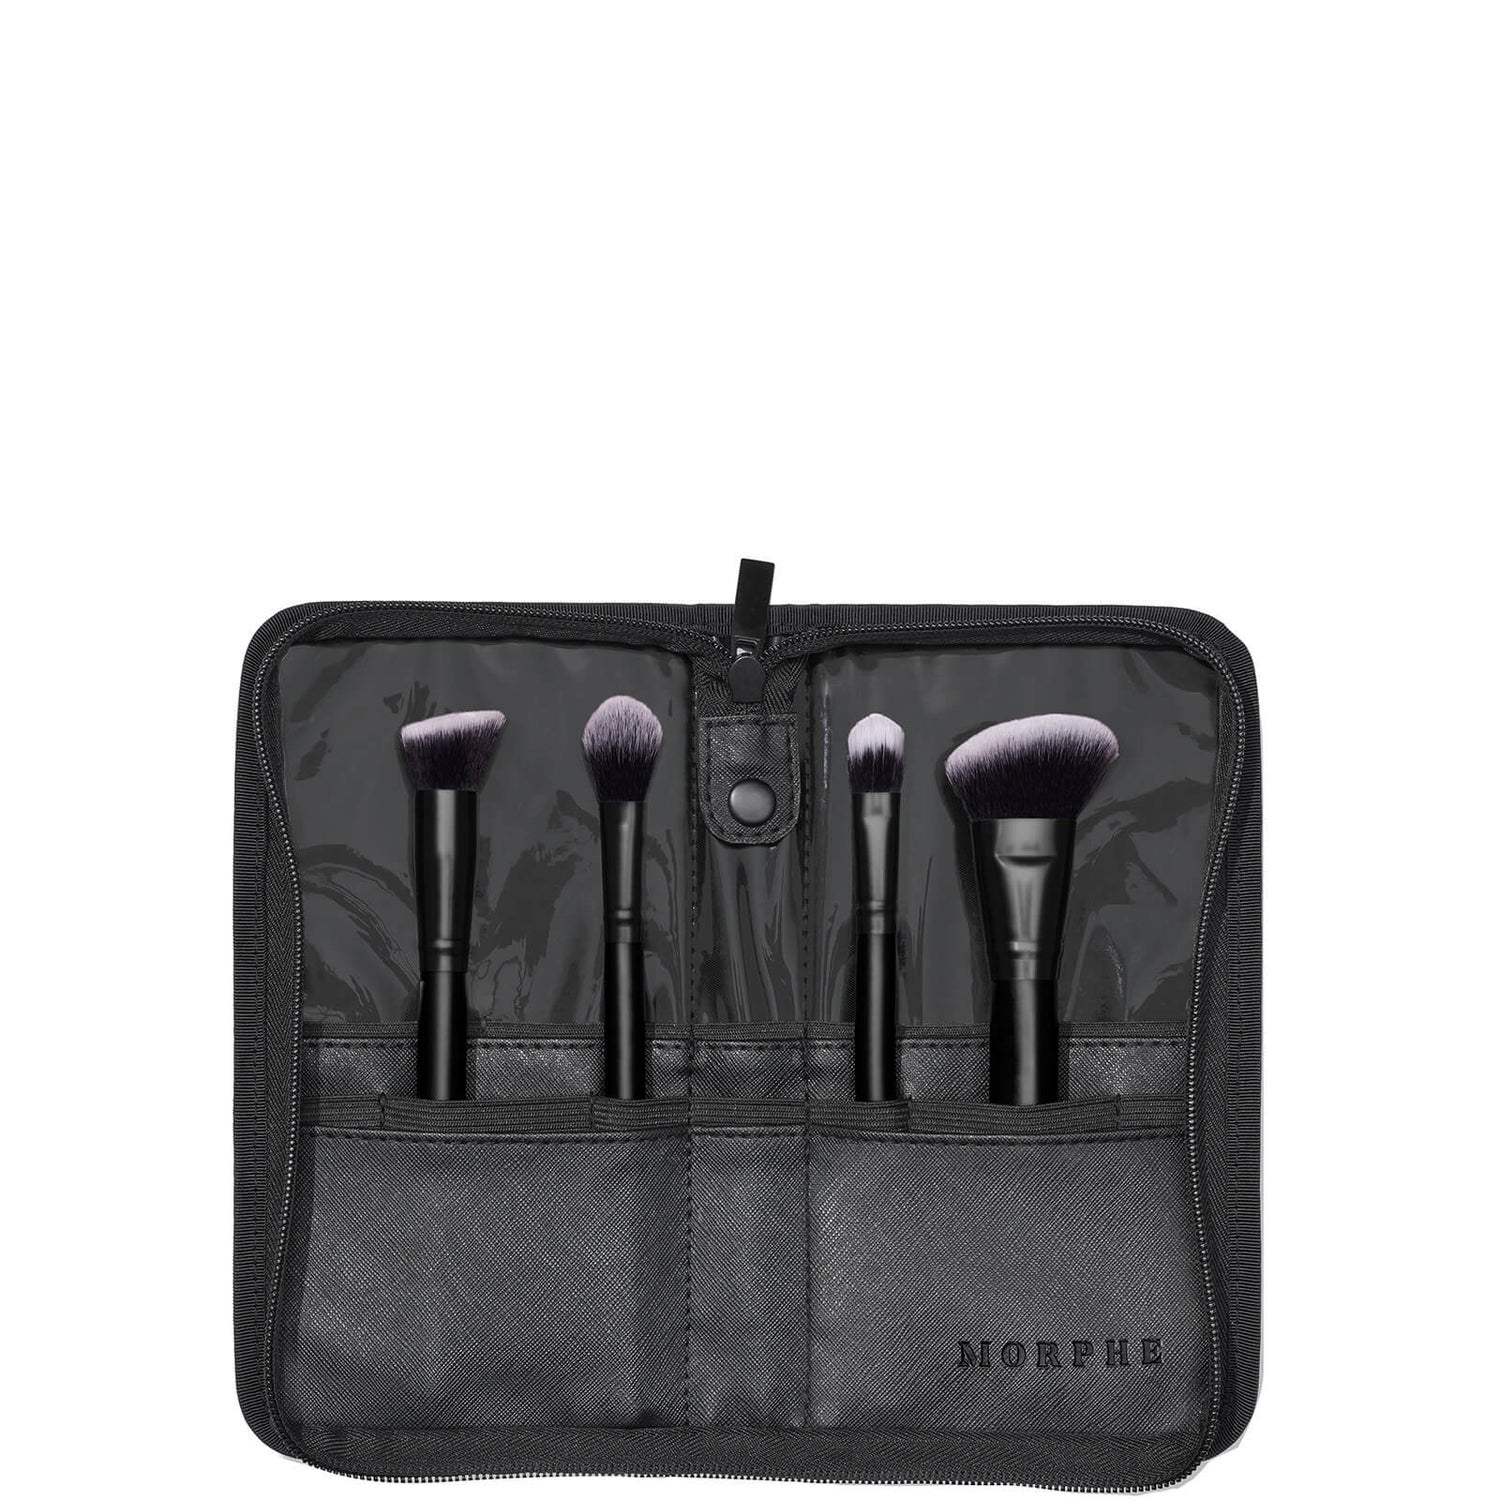 Morphe Perfect Angle 4-Piece Face Collection levering